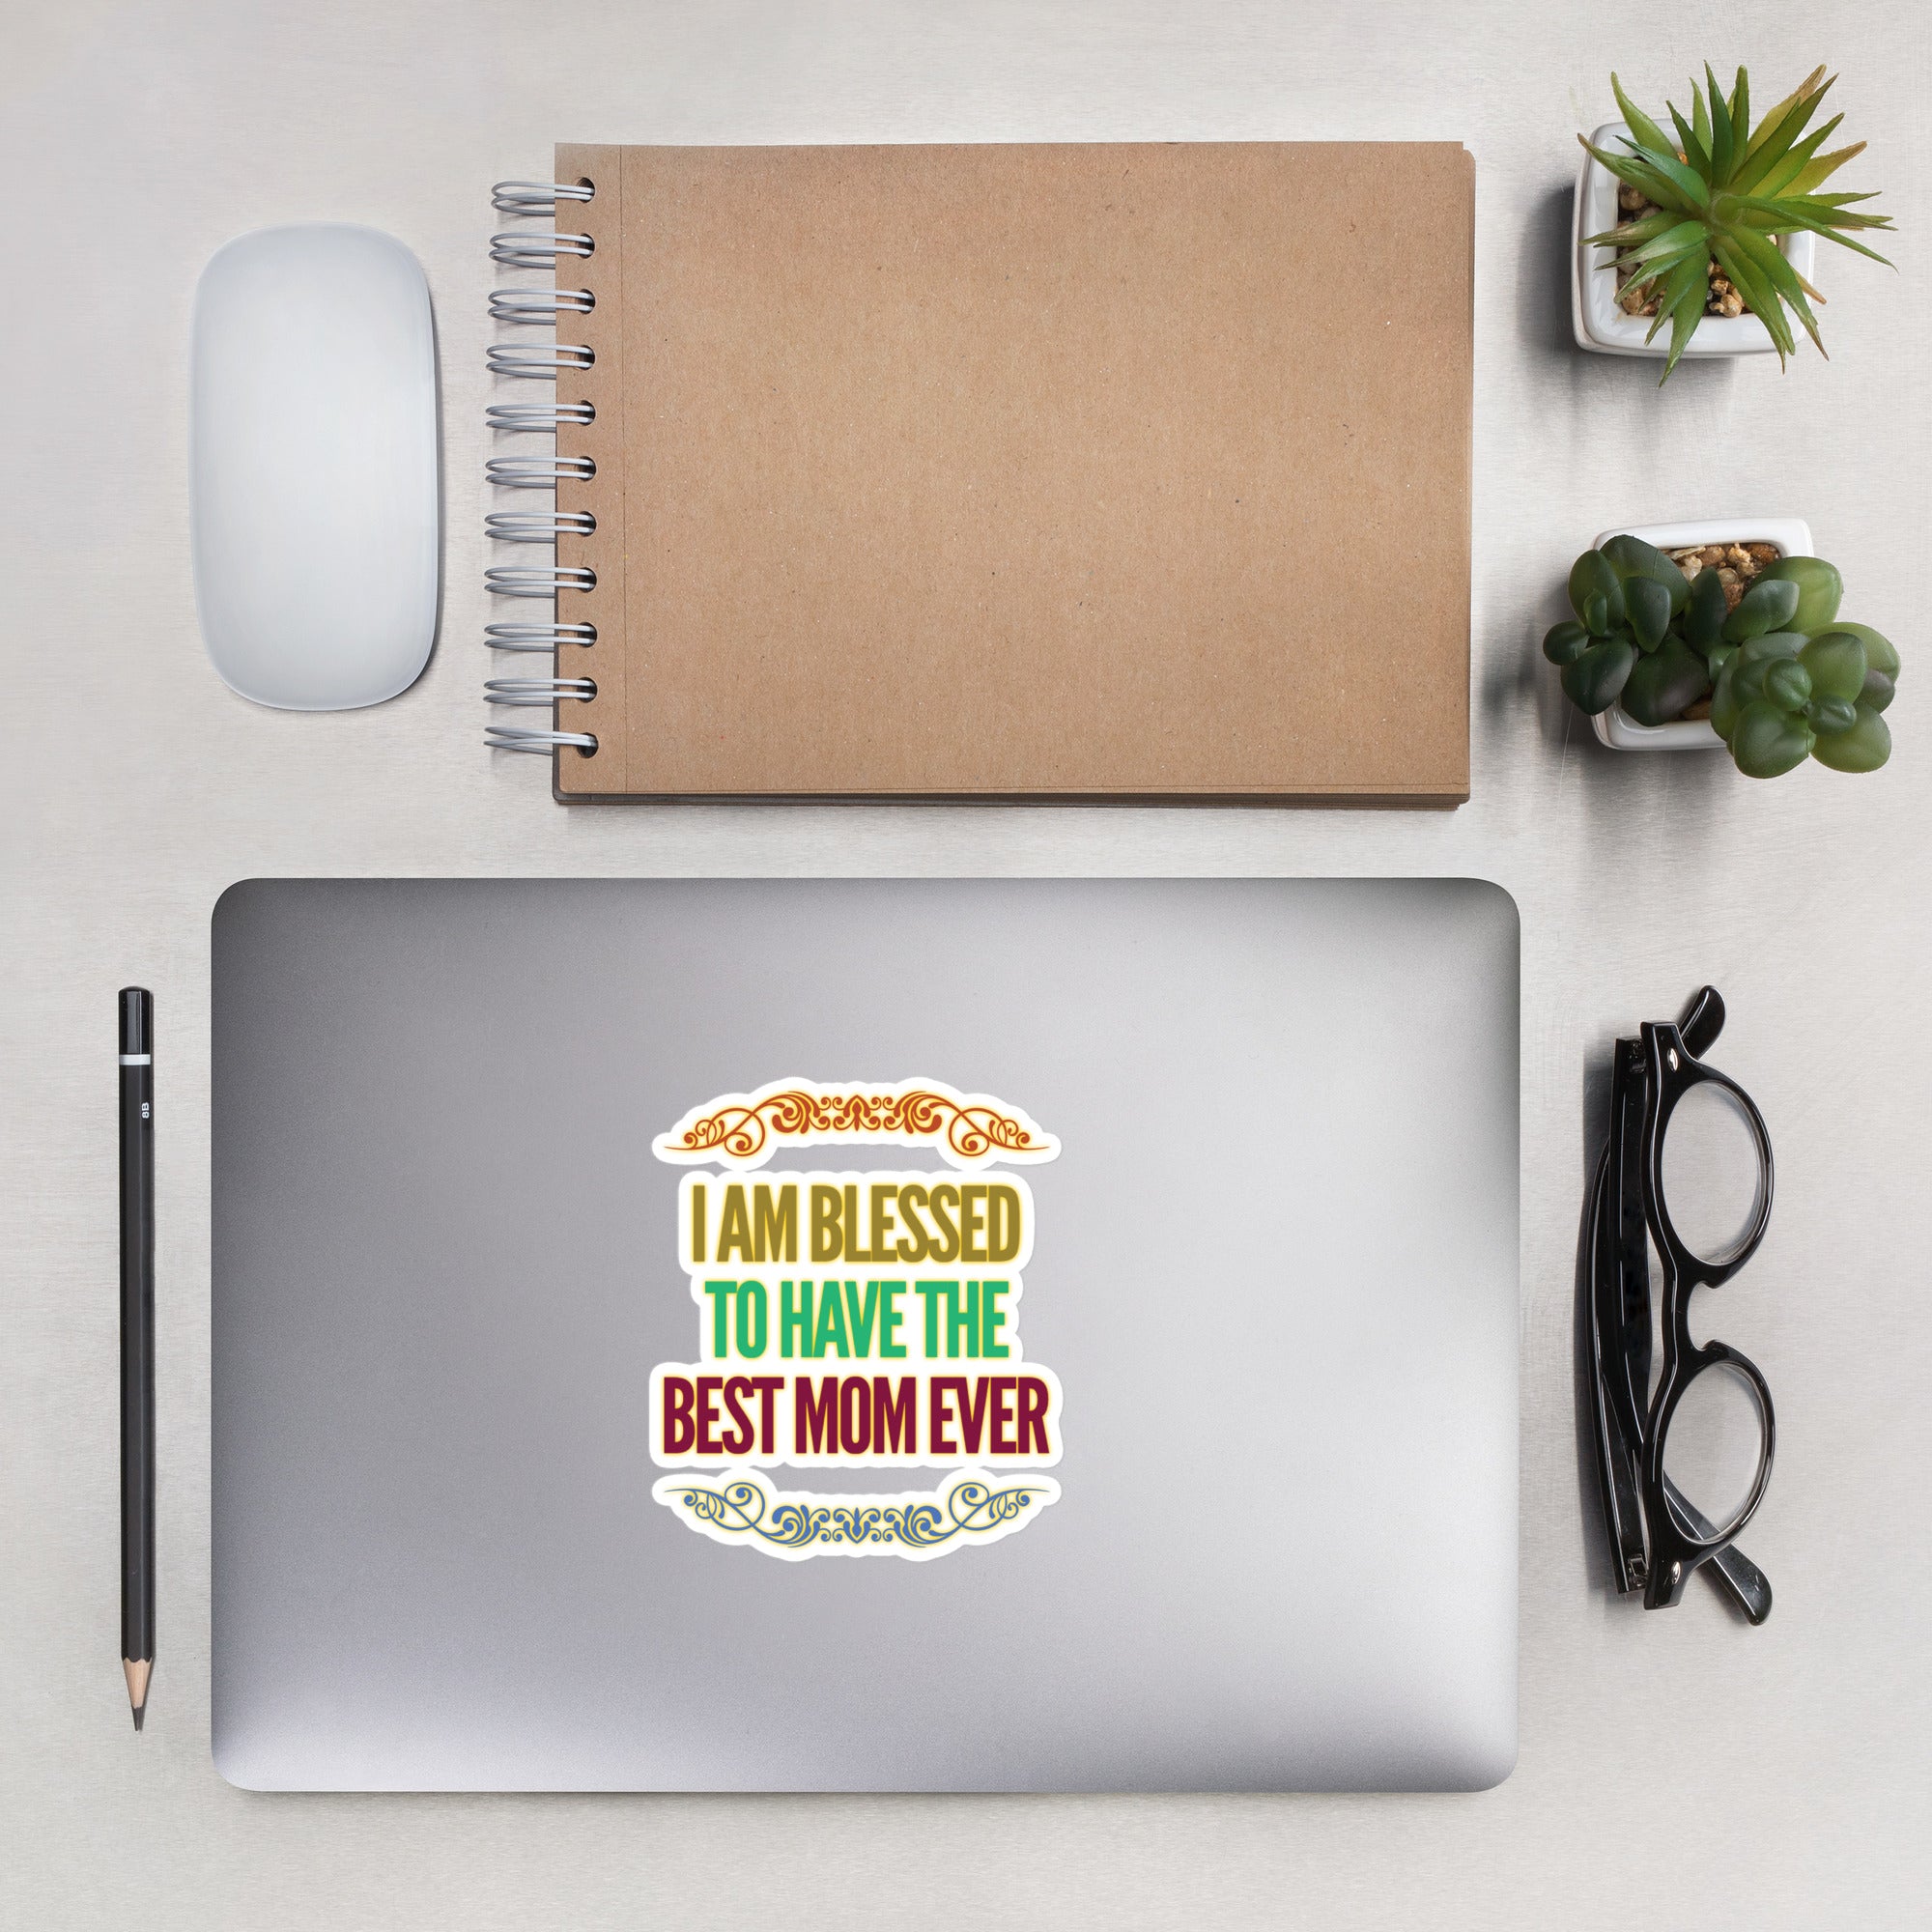 GloWell Designs - Bubble-Free Stickers - Affirmation Quote - Gift - Best Mom Ever - GloWell Designs